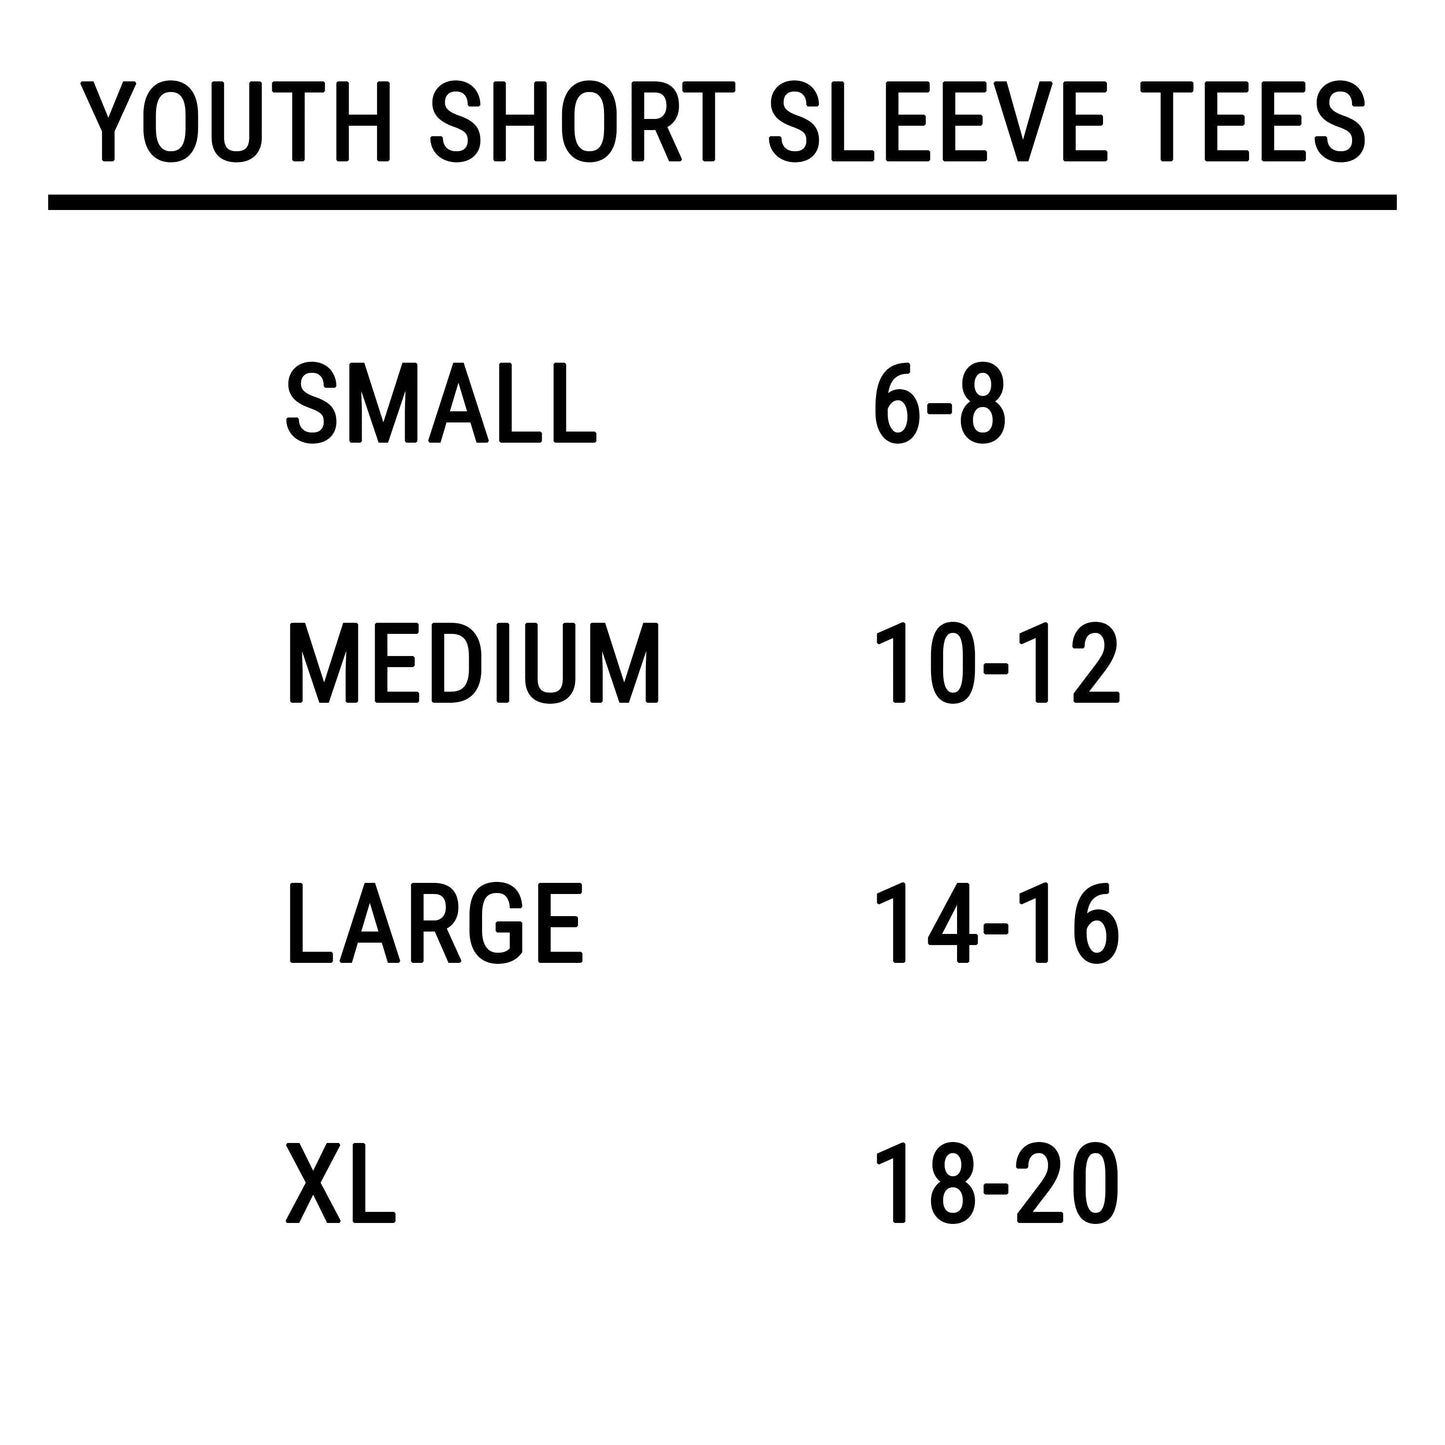 The Waves Are Calling Surf Board | Youth Short Sleeve Crew Neck